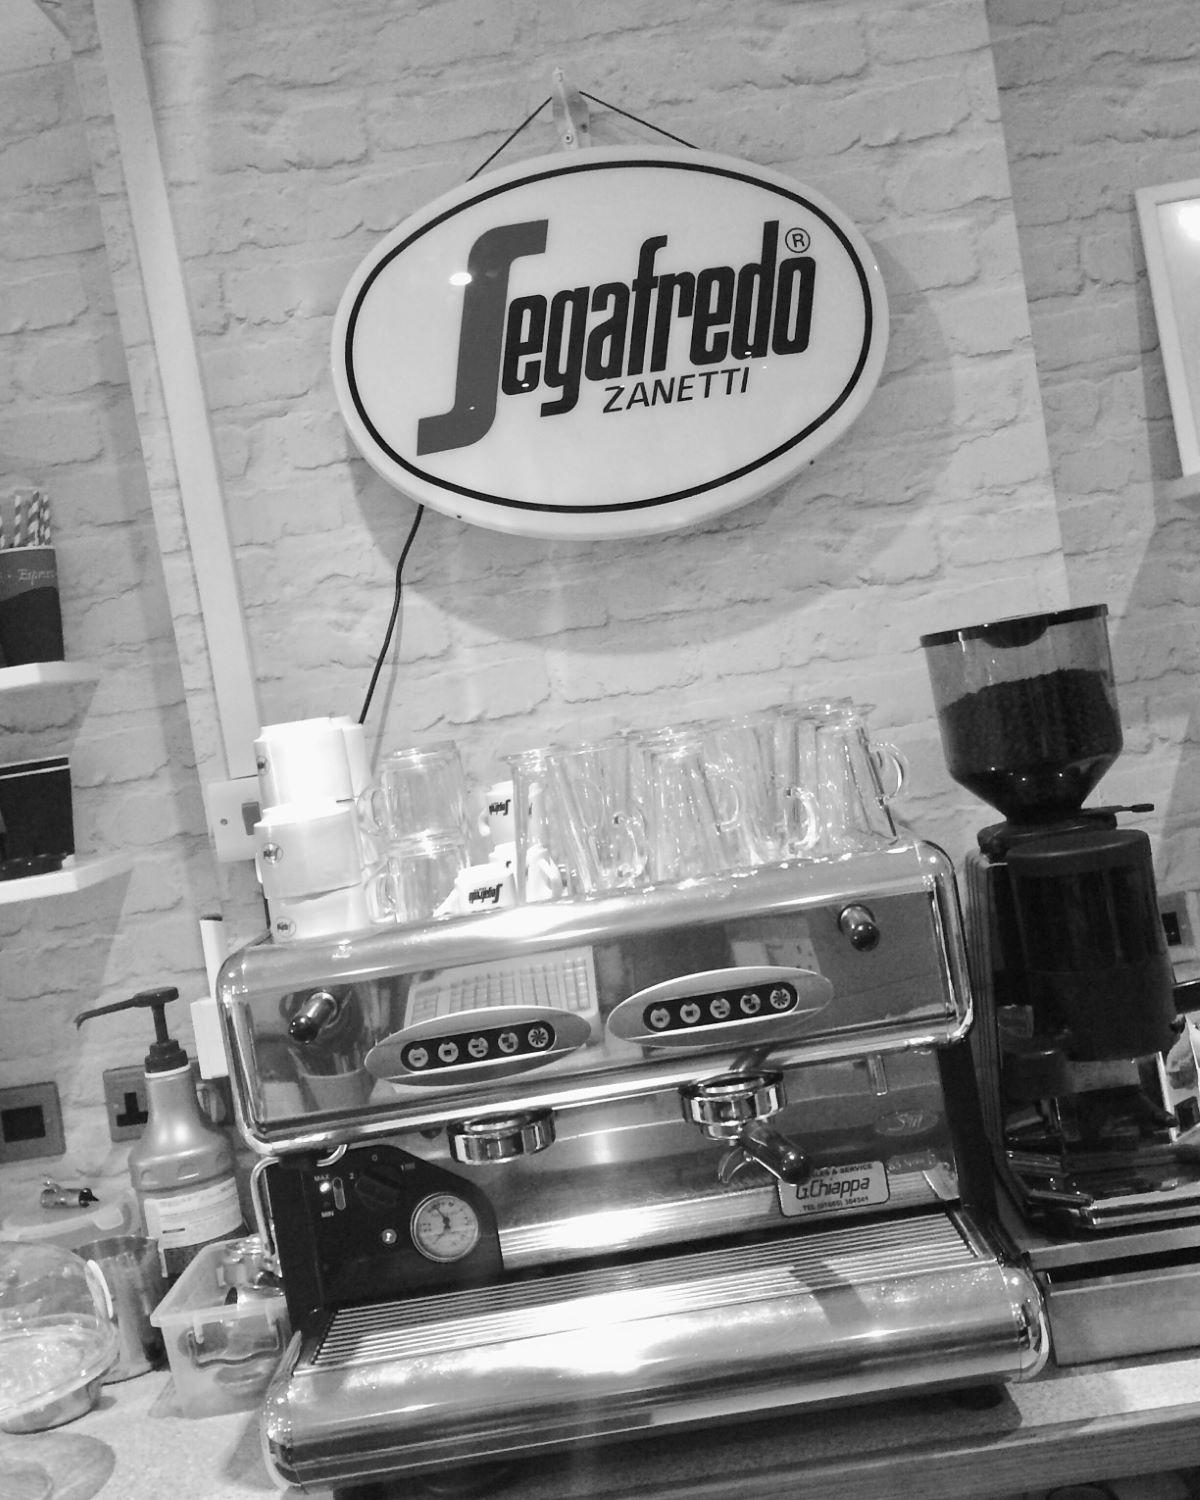 Images from Magor Coffee Co.